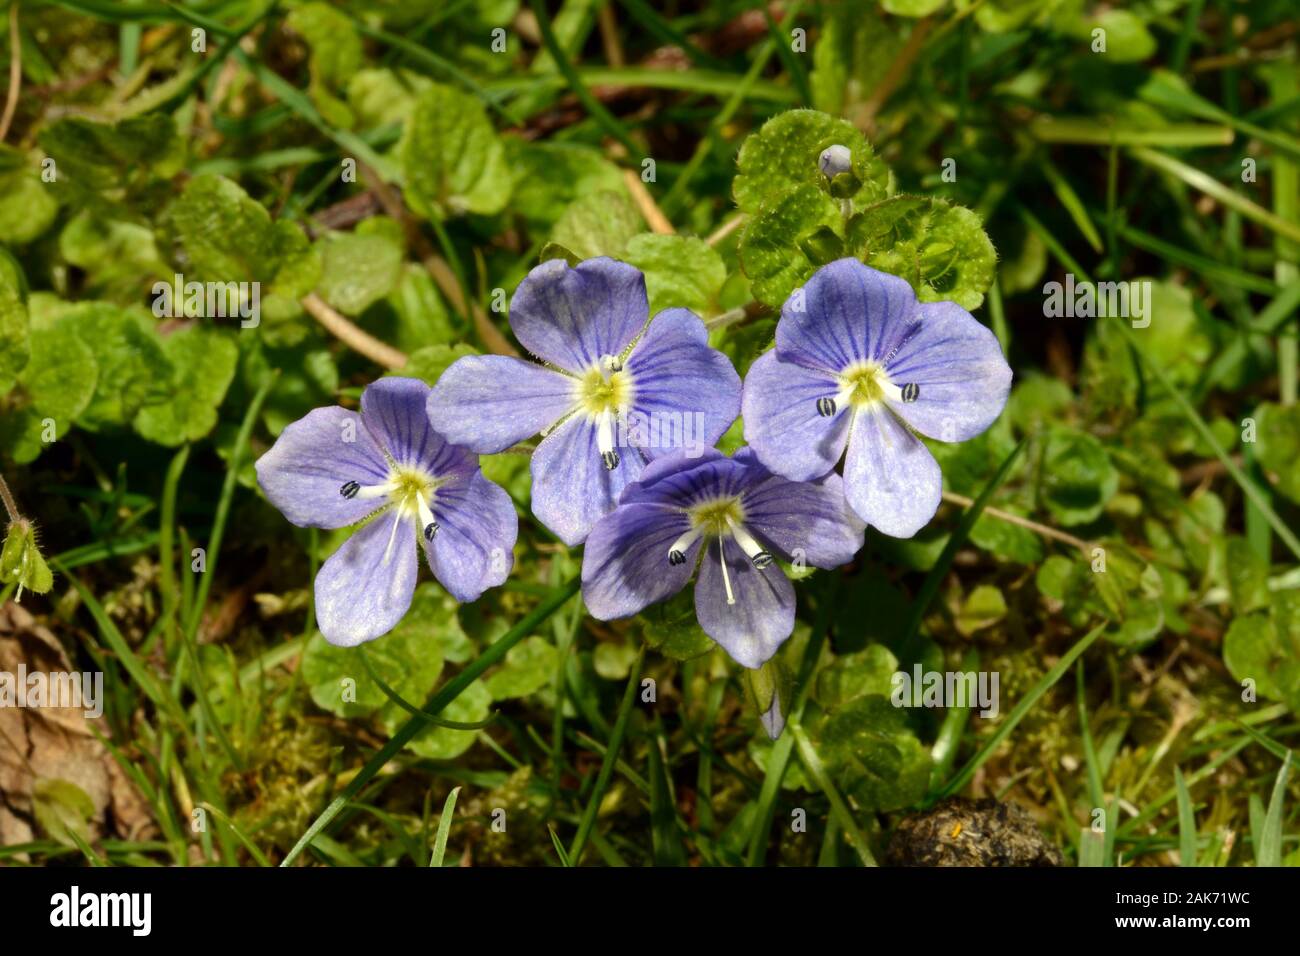 Veronica filiformis (slender speedwell) is native to eastern Europe and western Asia occurring in grassy places such as meadows. Stock Photo